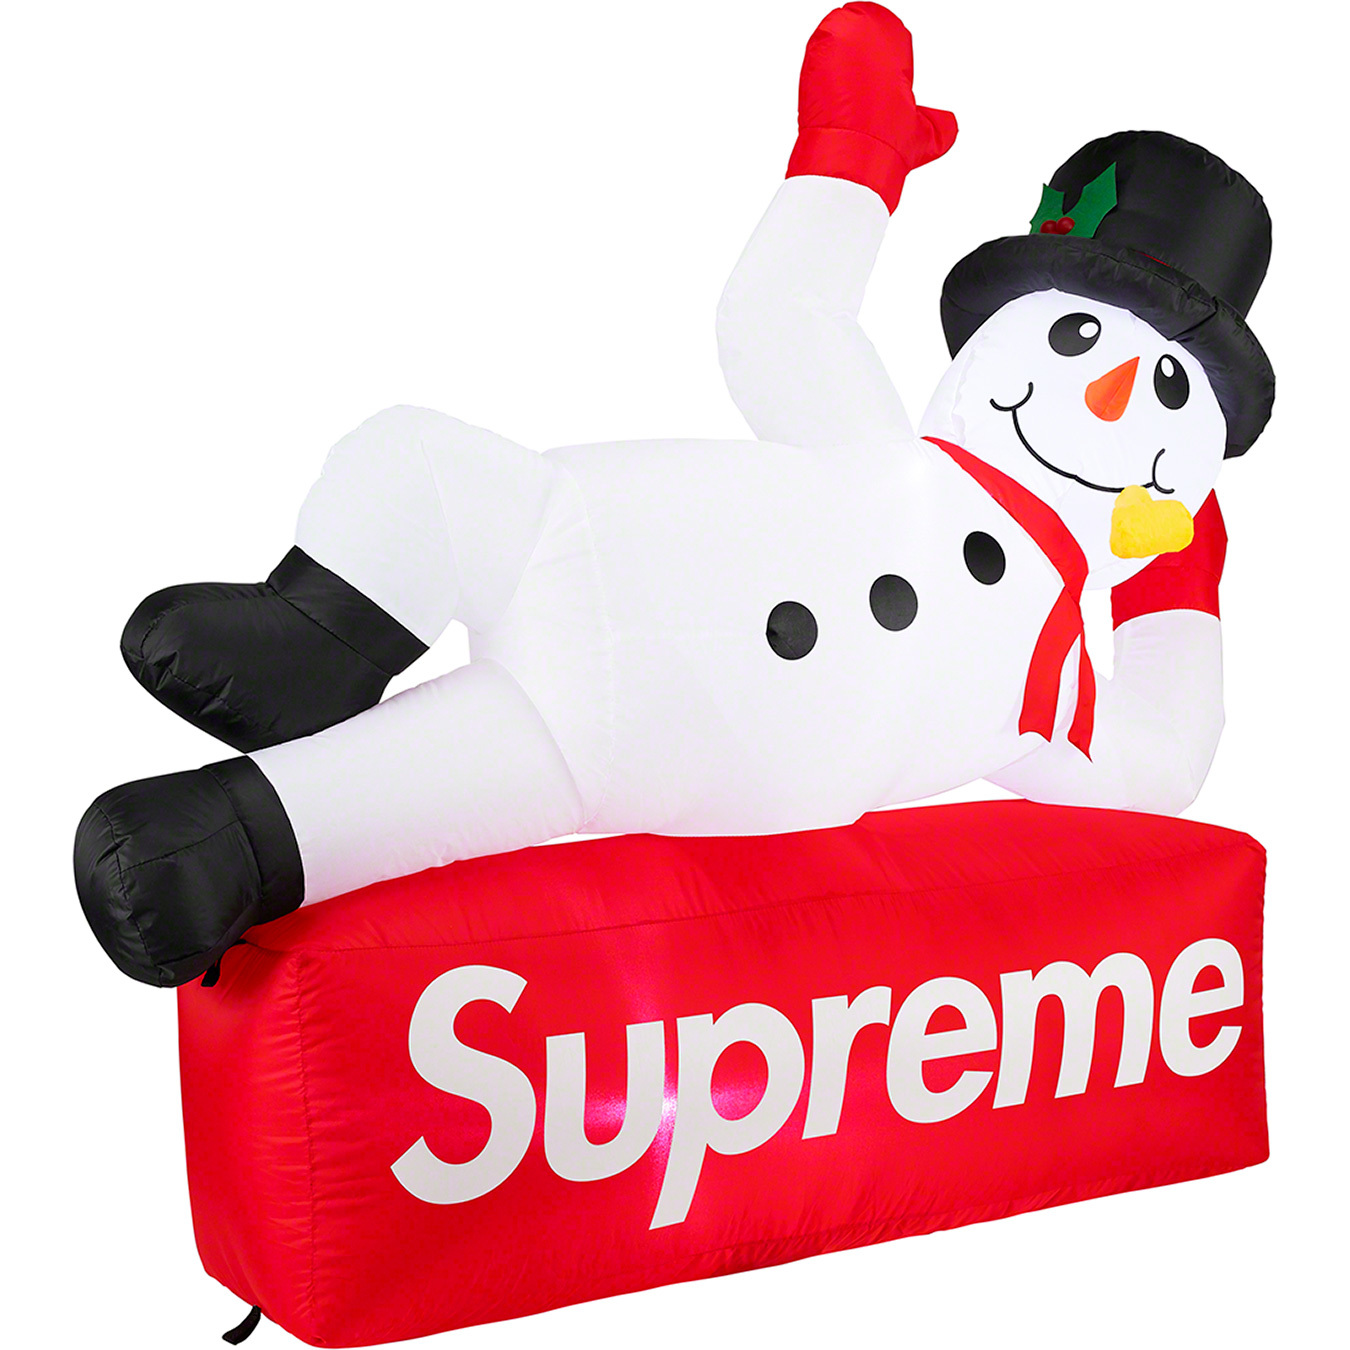 Supreme Large Inflatable Snowman